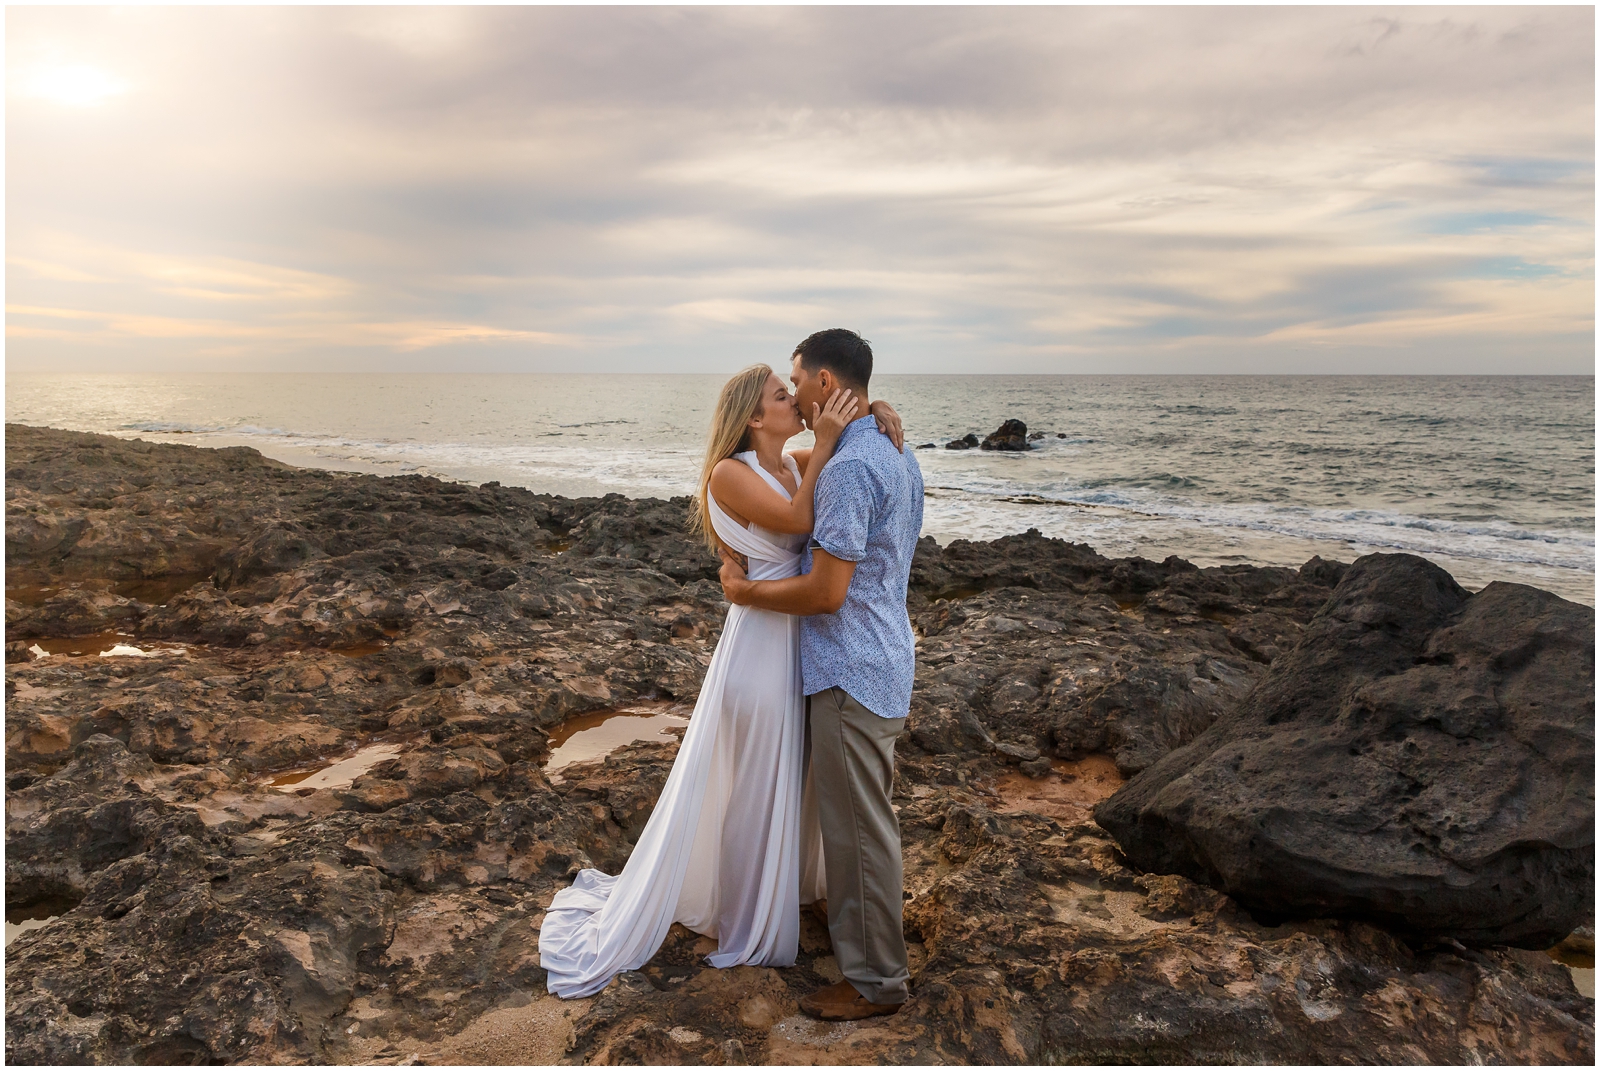 Sunset kisses during this couple's Hawaiian elopement. Eight Reasons Why You Should Get Married Outdoors!